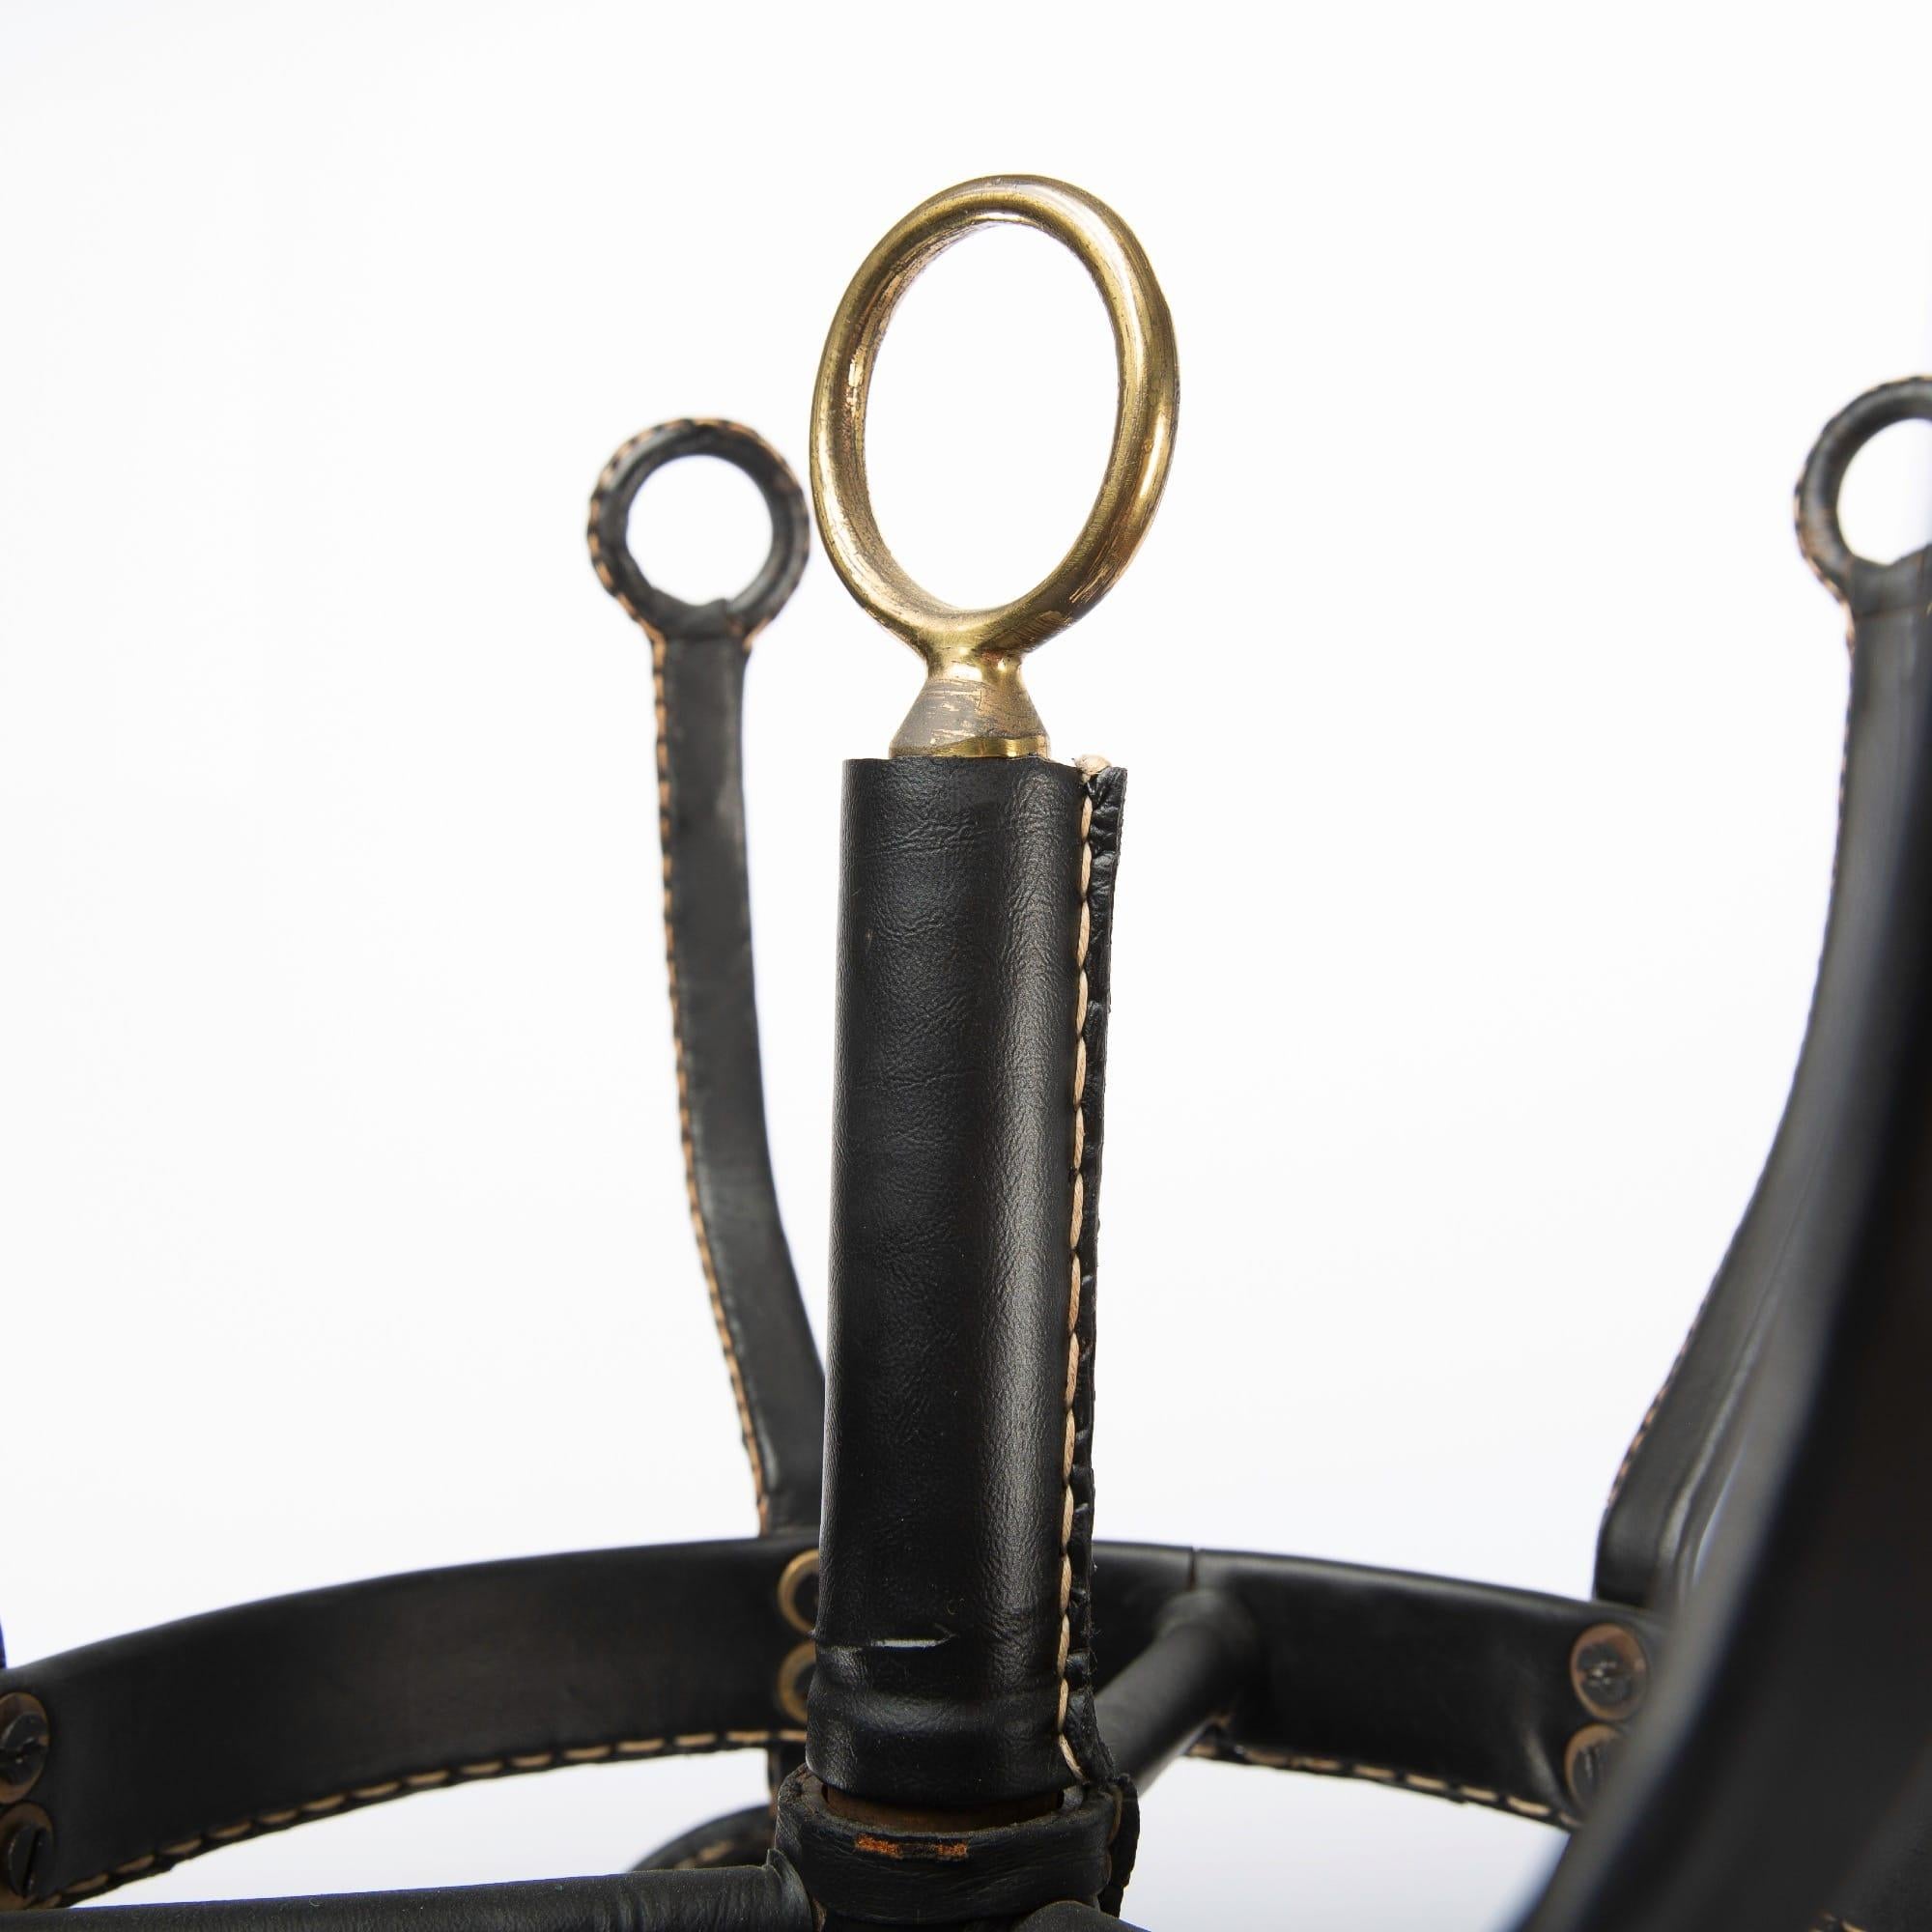 A beautiful coat hanger by Jacques Adnet (France), circa 1950.
Saddle stitched black leather work on a steel frame with brass accents.
Rare item, very clean condition.

Jacques Edouard Jules Adnet was born in Châtillon-Coligny France in 1900 and